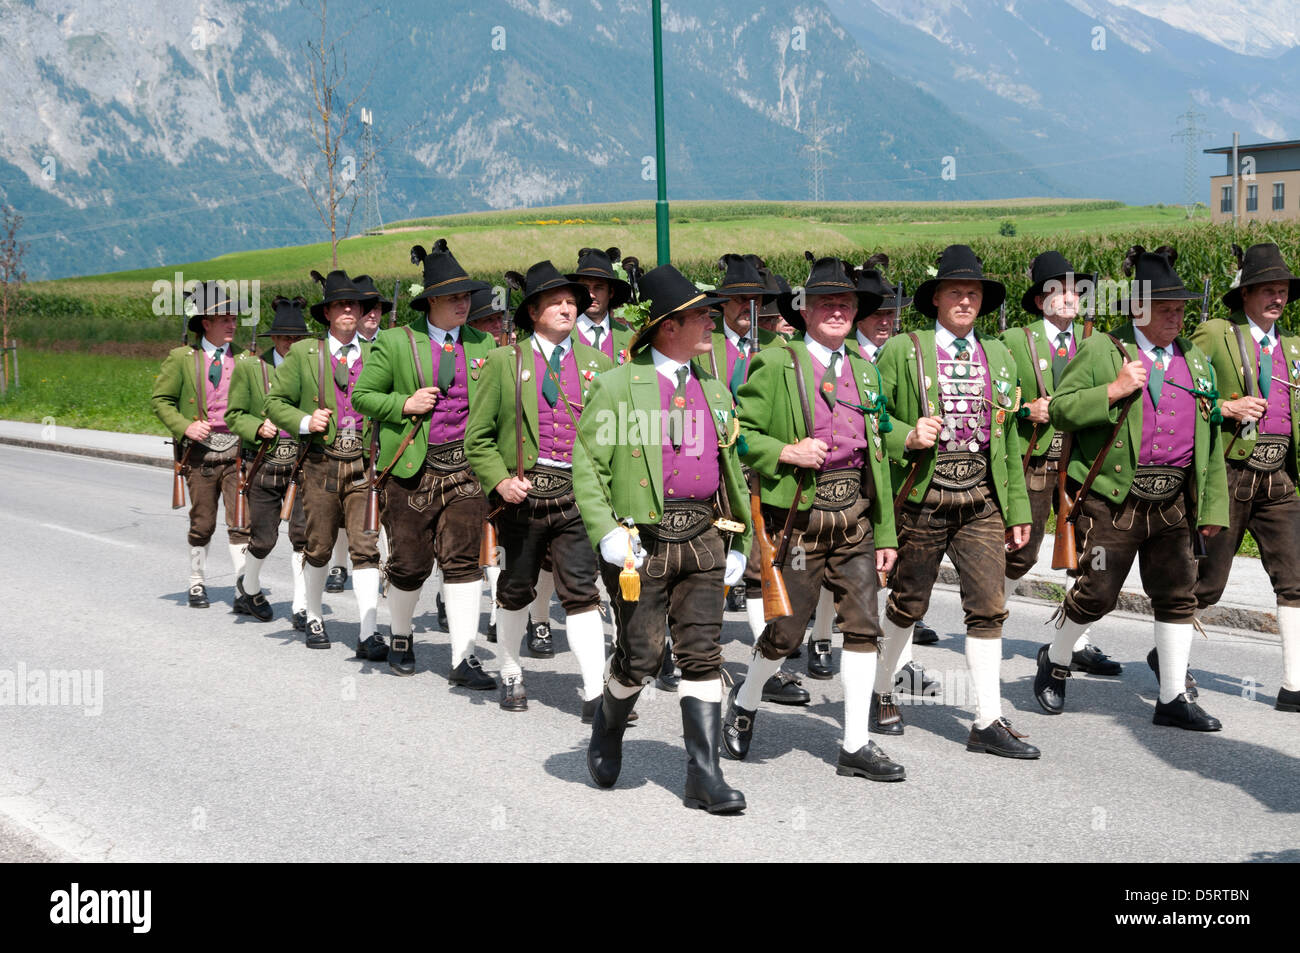 people making music in procession to the church on Maria Ascension,on August 15, 2012 in Axams, Austria. Stock Photo